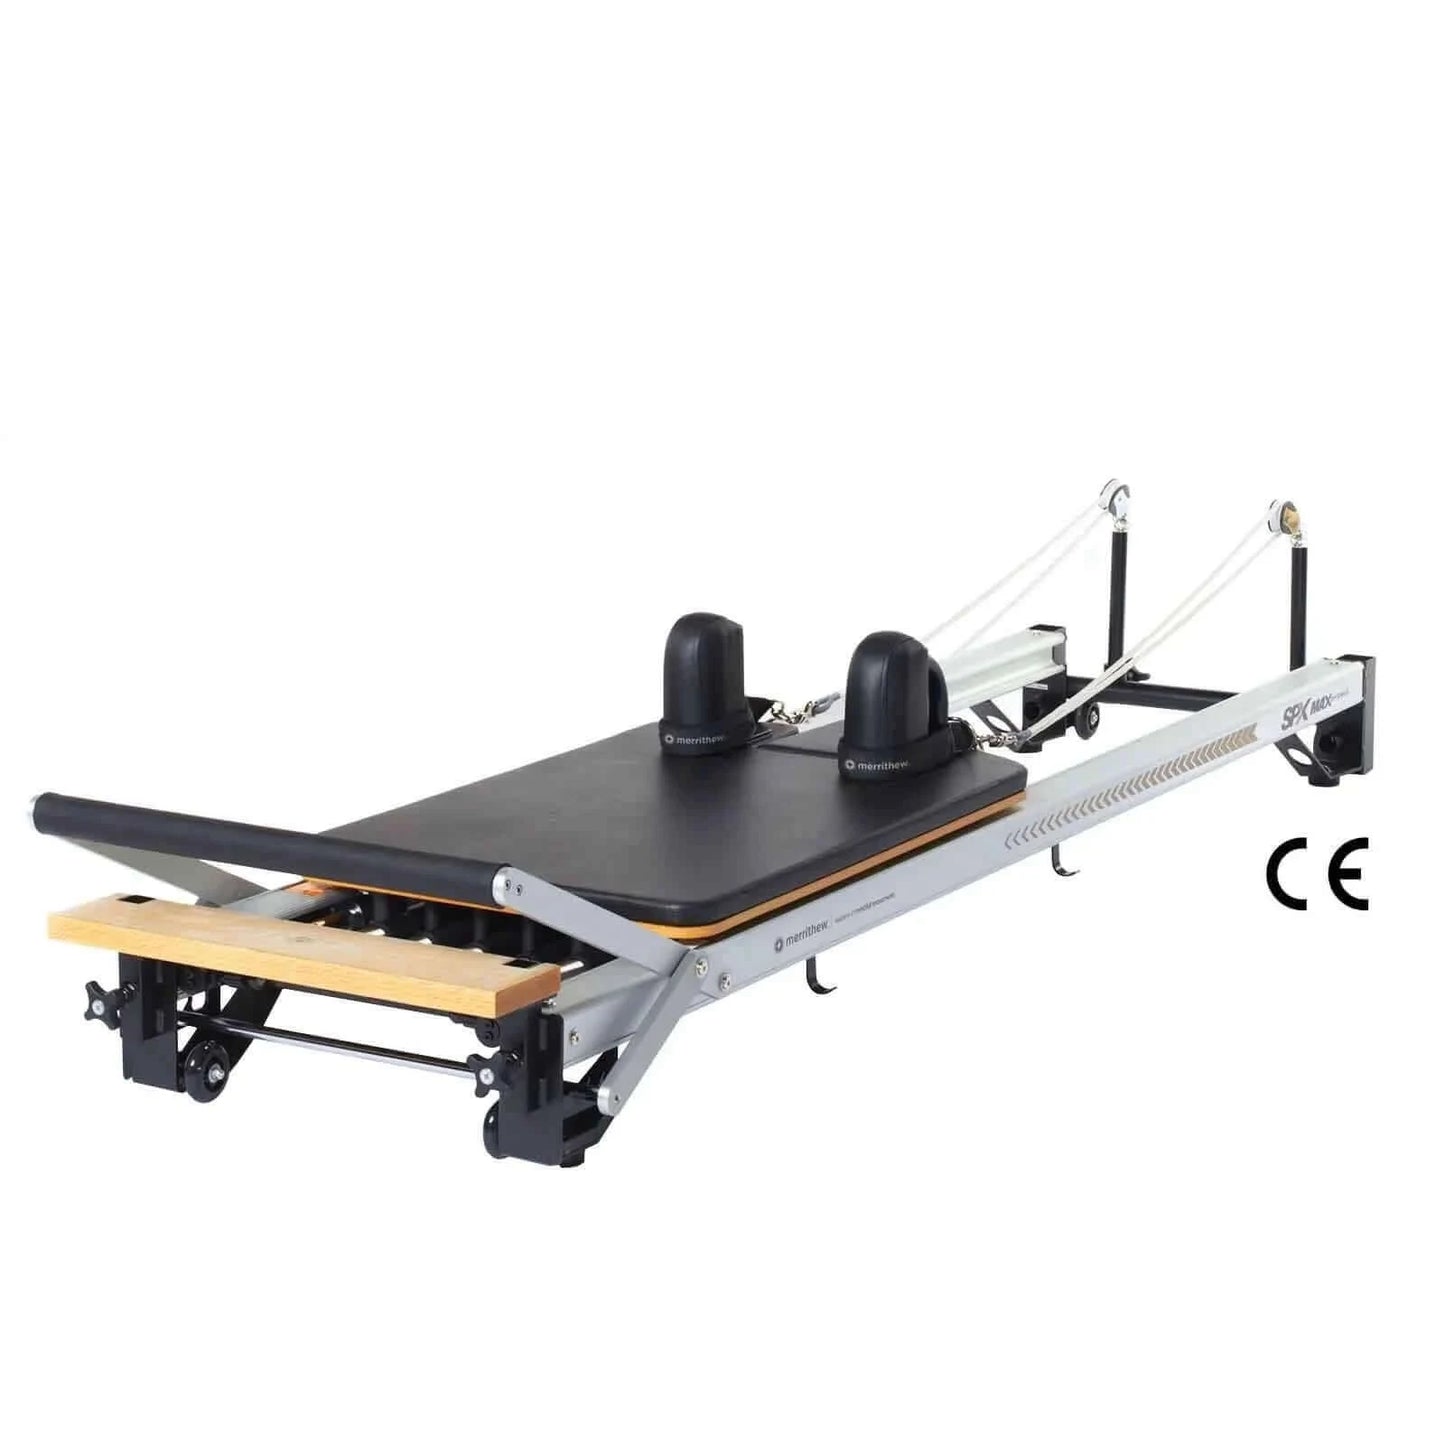 Black Merrithew™ Pilates SPX® Max Reformer by Merrithew™ sold by Pilates Matters® by BSP LLC